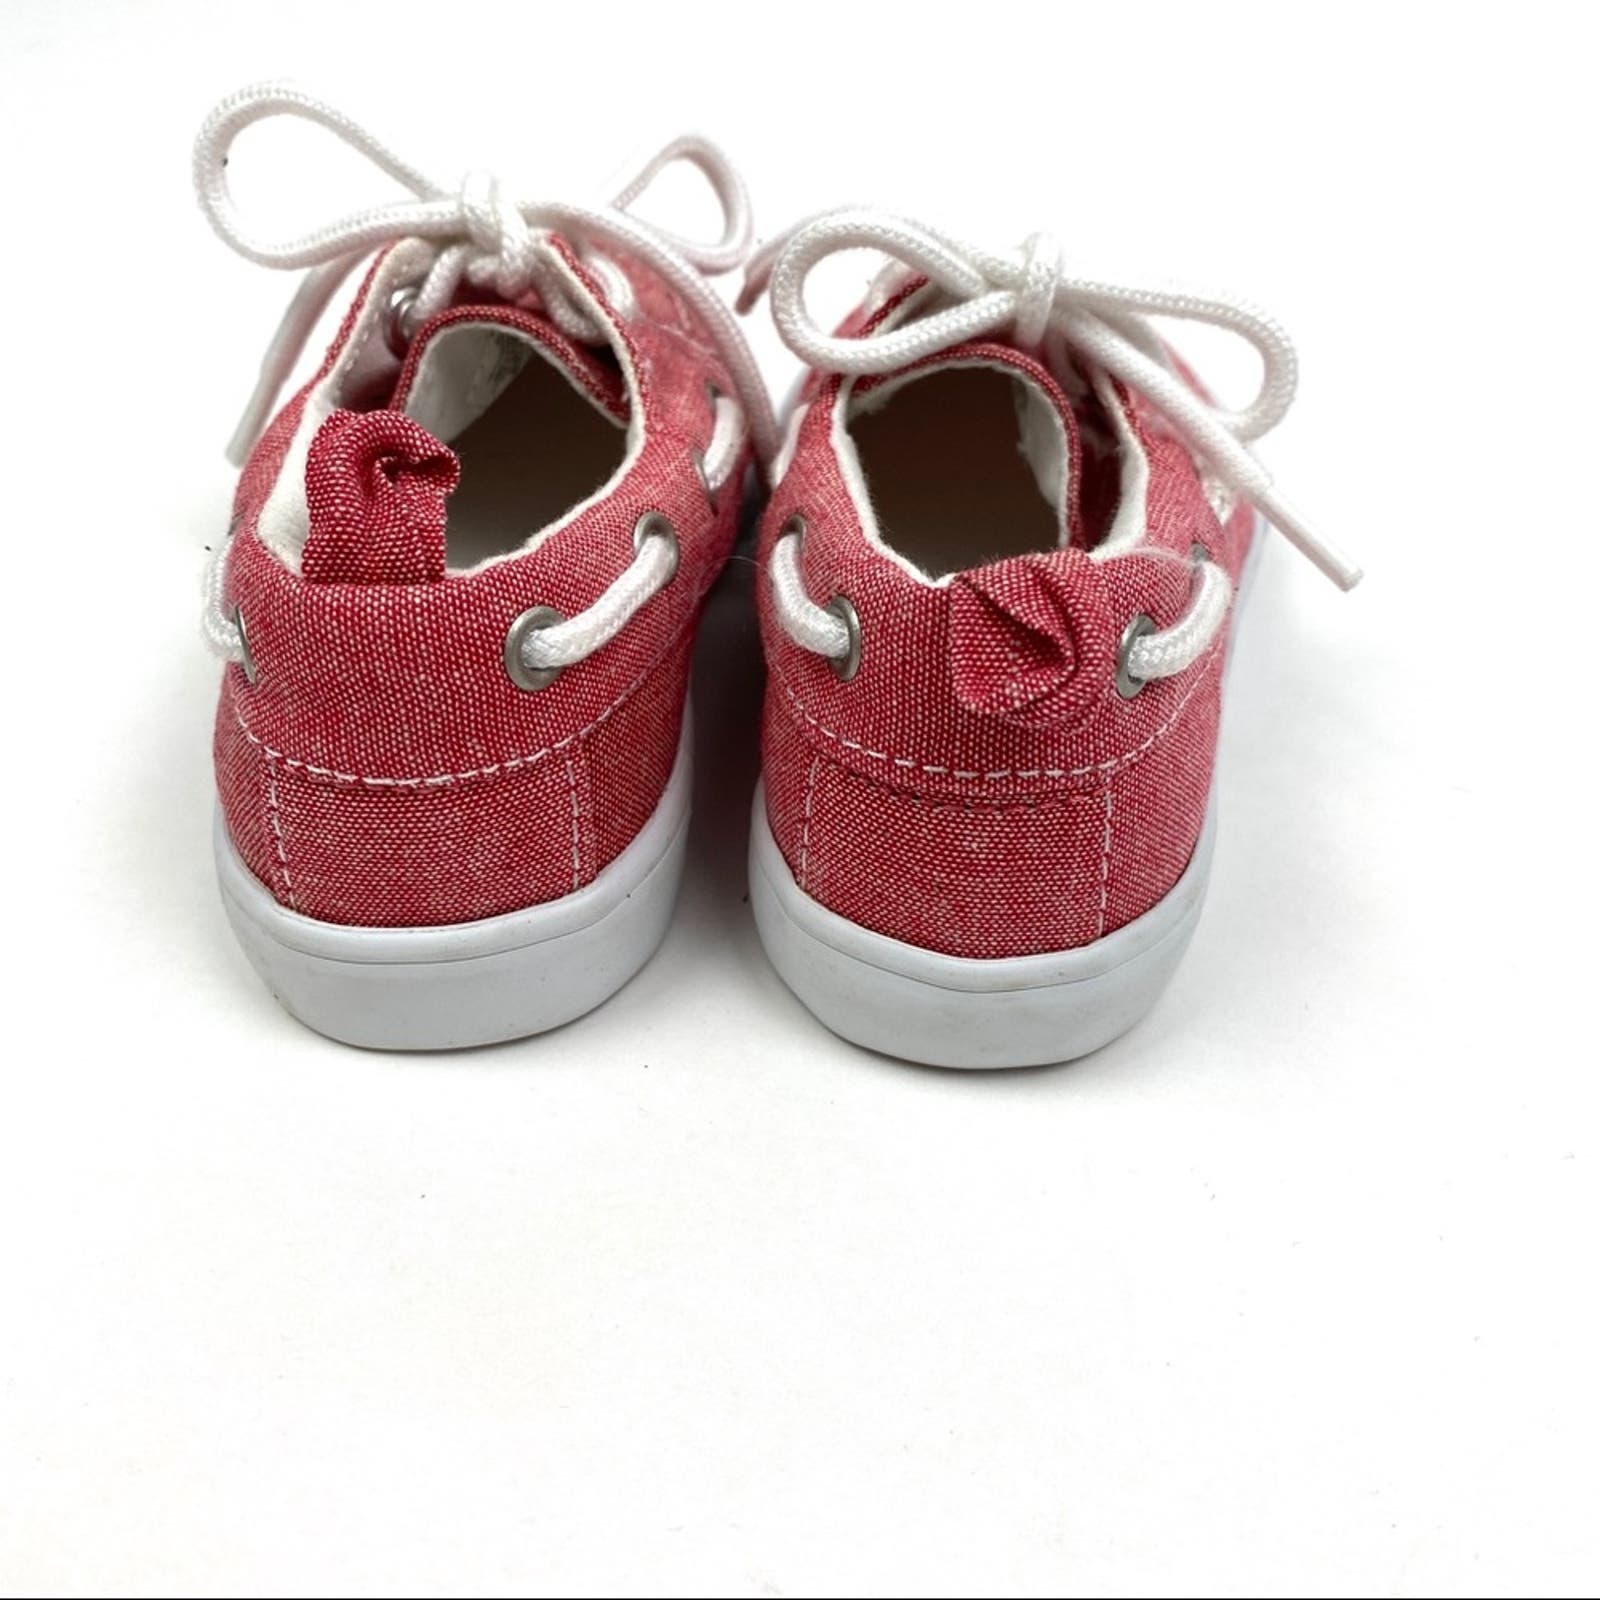 Gymboree Boys Red Canvas Boat Shoes Toddler 7